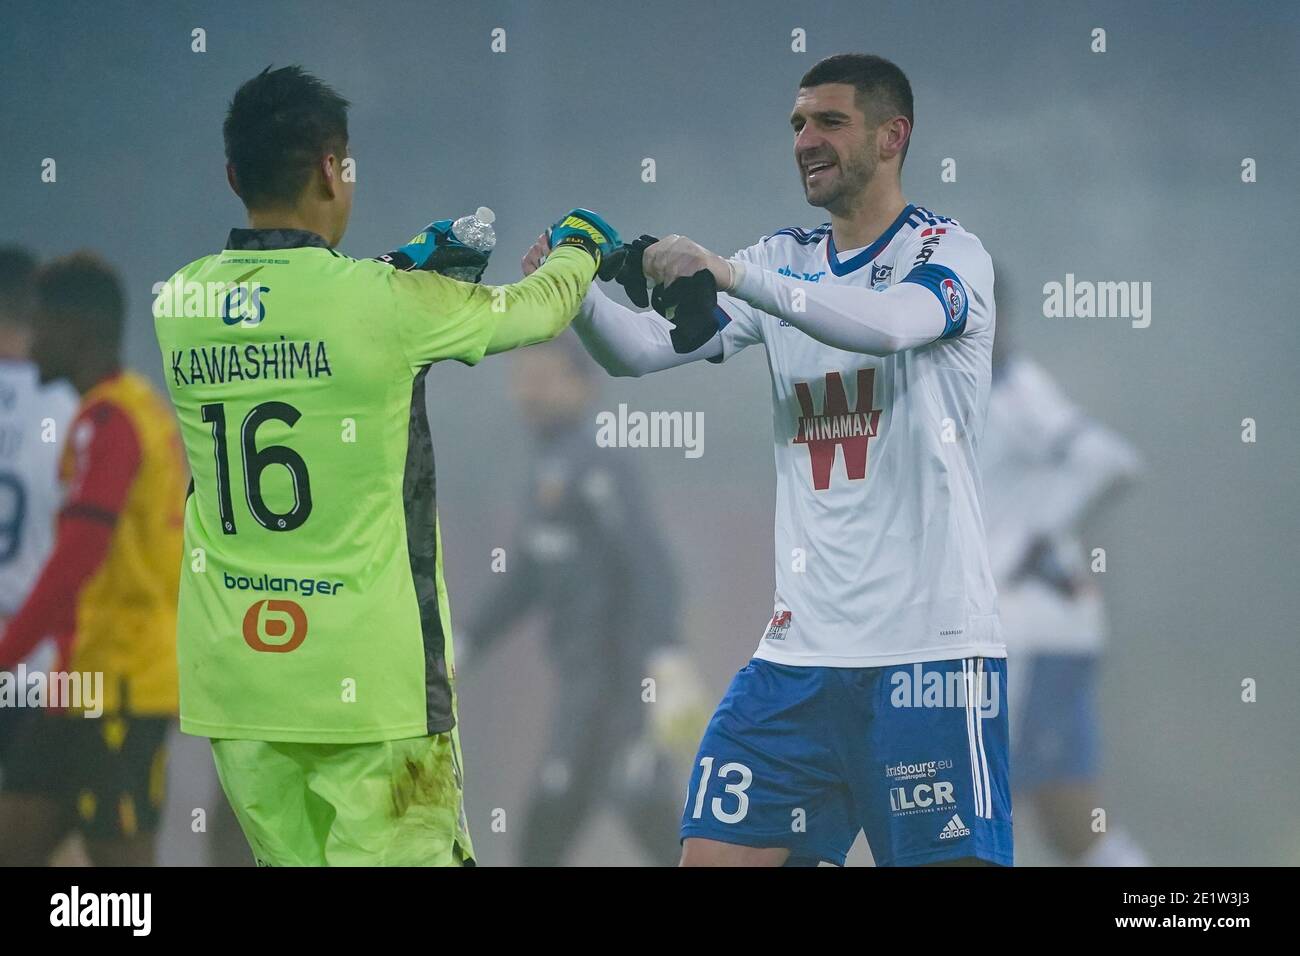 LENS, NETHERLANDS - JANUARY 9: L-R: Eiji Kawashima of RC Strasbourg, Stefan Mitrovic of RC Strasbourg during the Ligue 1 match between RC Lens and RC Strasbourg at Stade Bollaert-Delelis on January 9, 2021 in Lens, Netherlands (Photo by Jeroen Meuwsen/BSR AgencyOrange PicturesAlamy Live News) Stock Photo